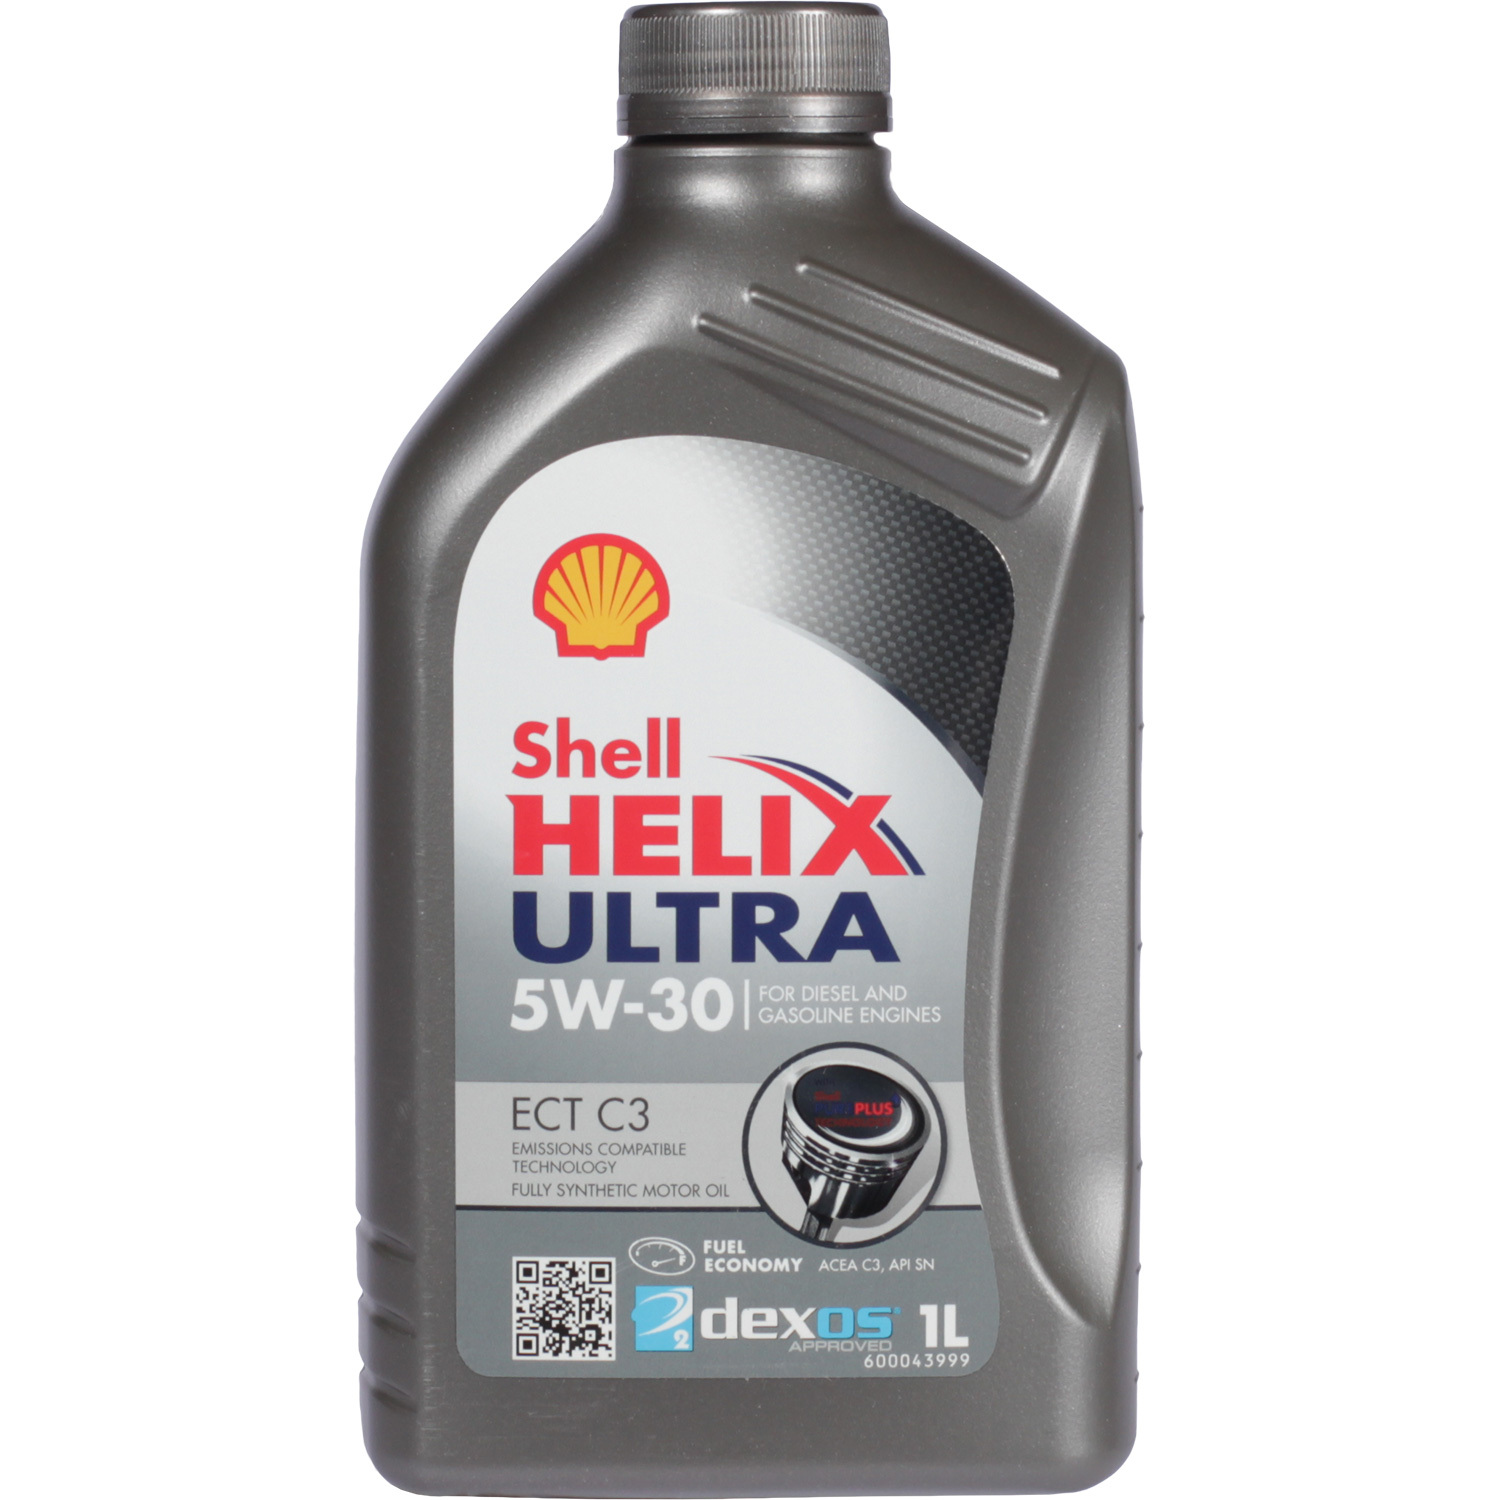 Shell Моторное масло Shell Helix Ultra ECT С3 5W-30, 1 л shell моторное масло shell helix hx8 5w 30 1 л